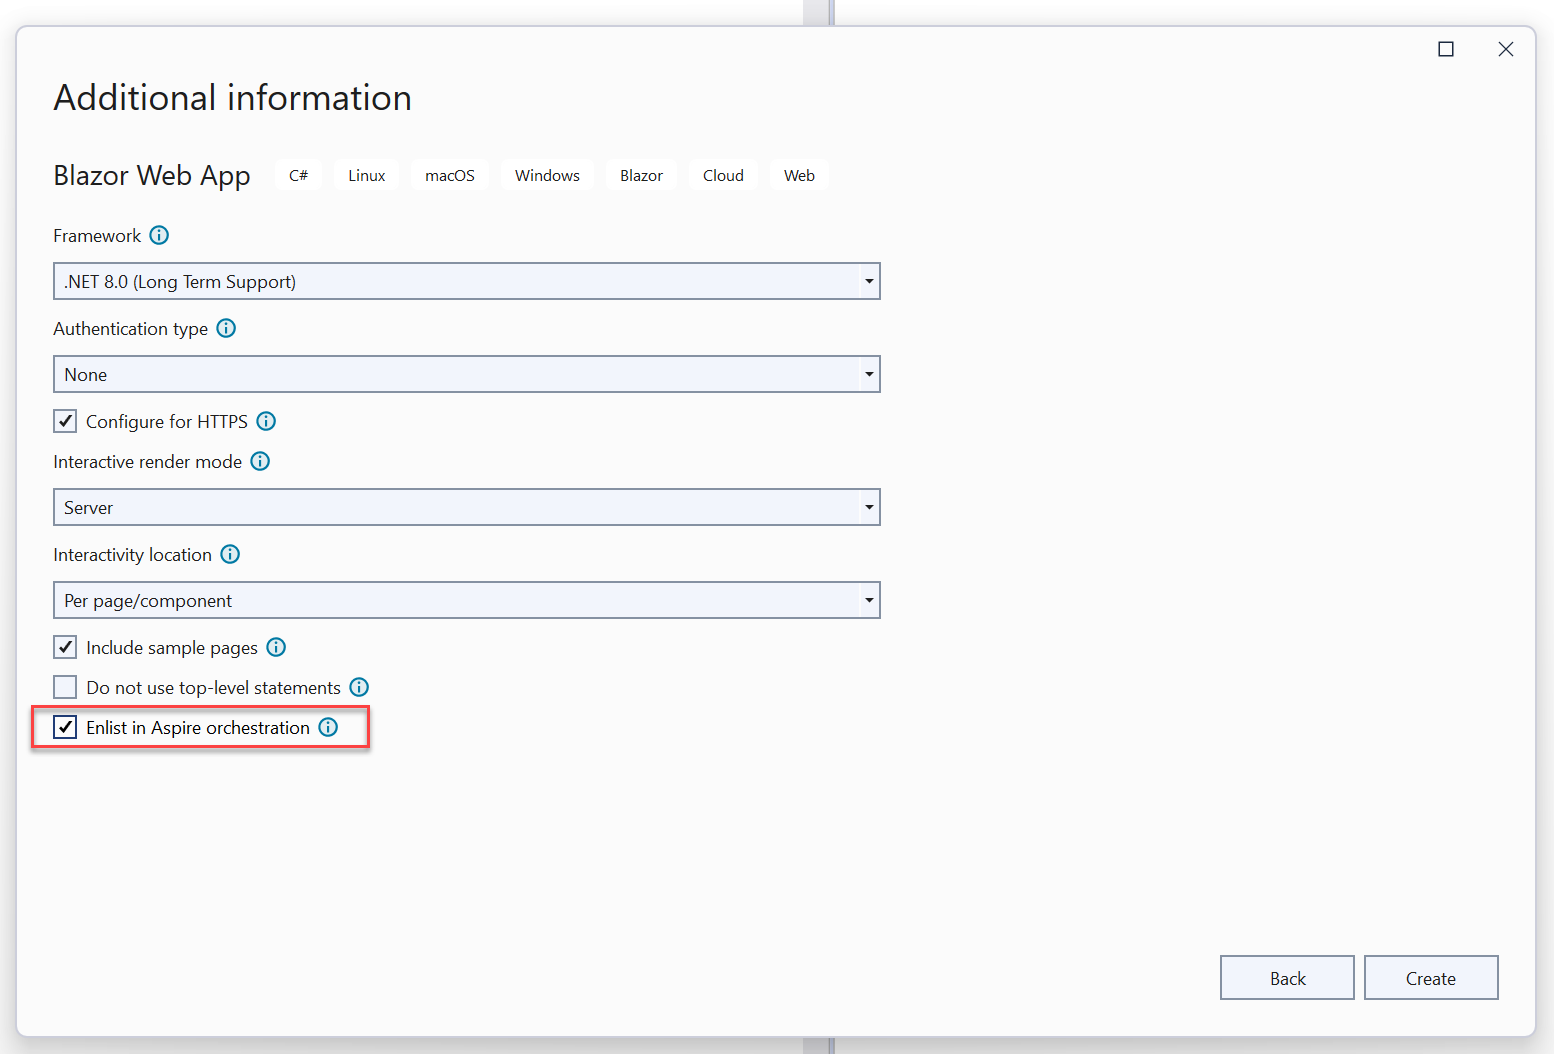 A screenshot showing how to enlist in .NET Aspire orchestration.